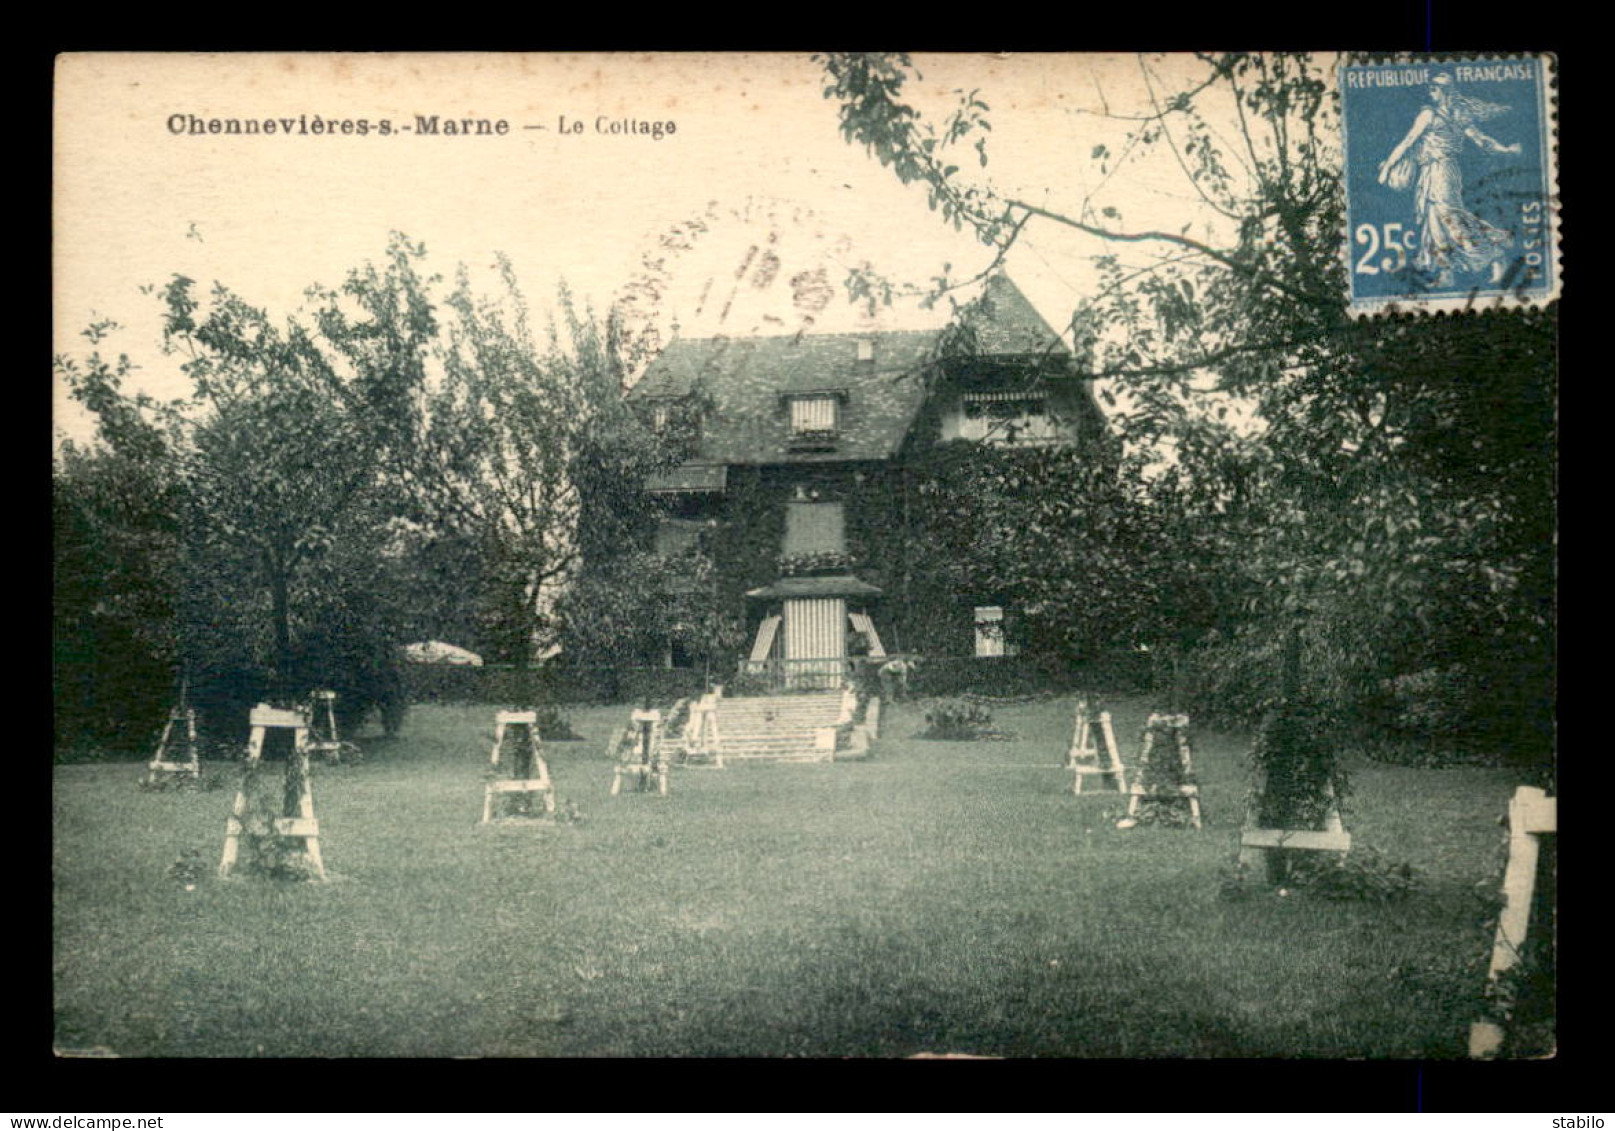 94 - CHENNEVIERES - LE COTTAGE - Chennevieres Sur Marne